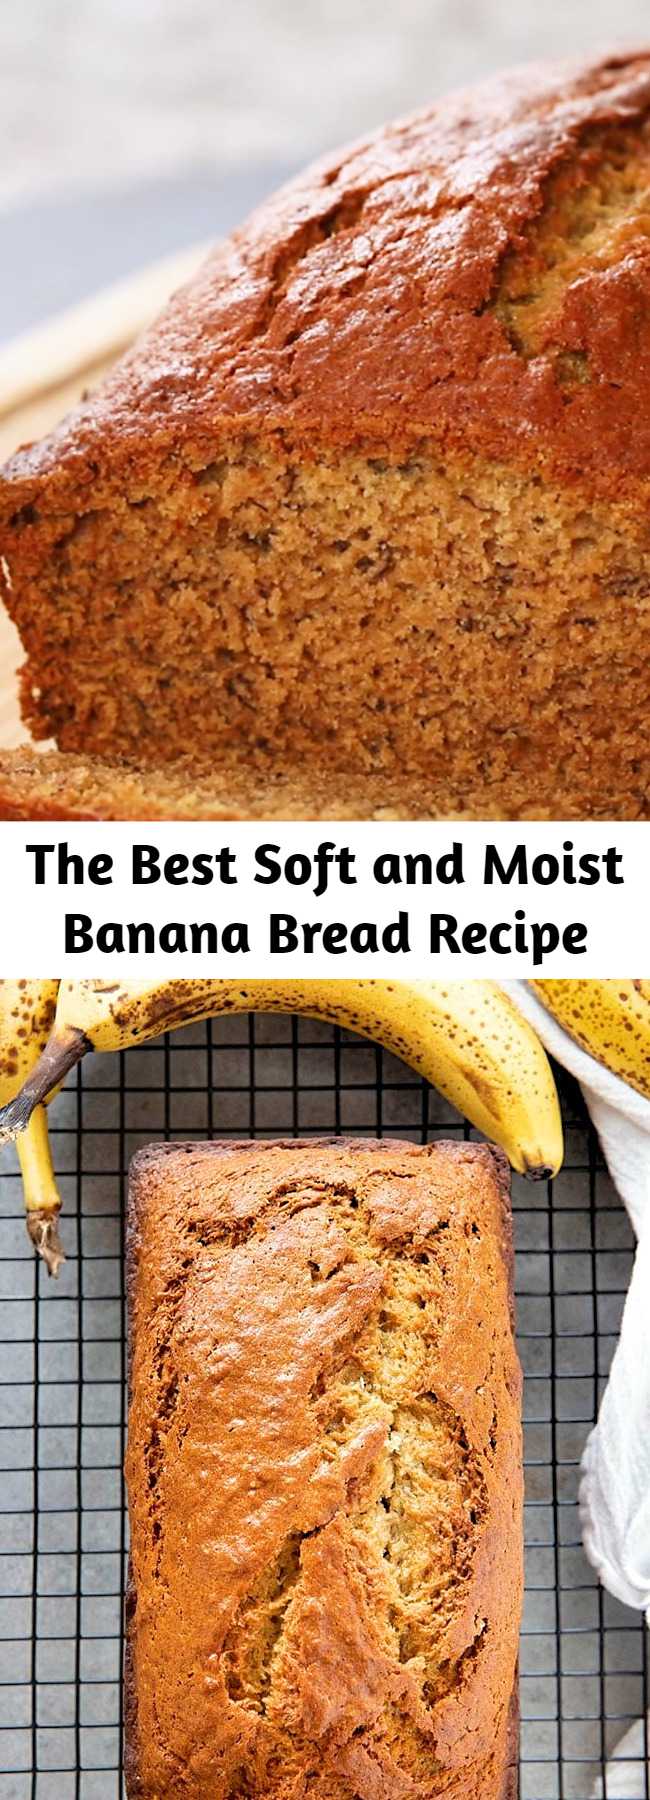 The Best Soft and Moist Banana Bread Recipe - Best Banana Bread Recipe is so easy to make and super soft and moist! The very best way to use up overripe bananas this bread is tender and packed full of flavor!